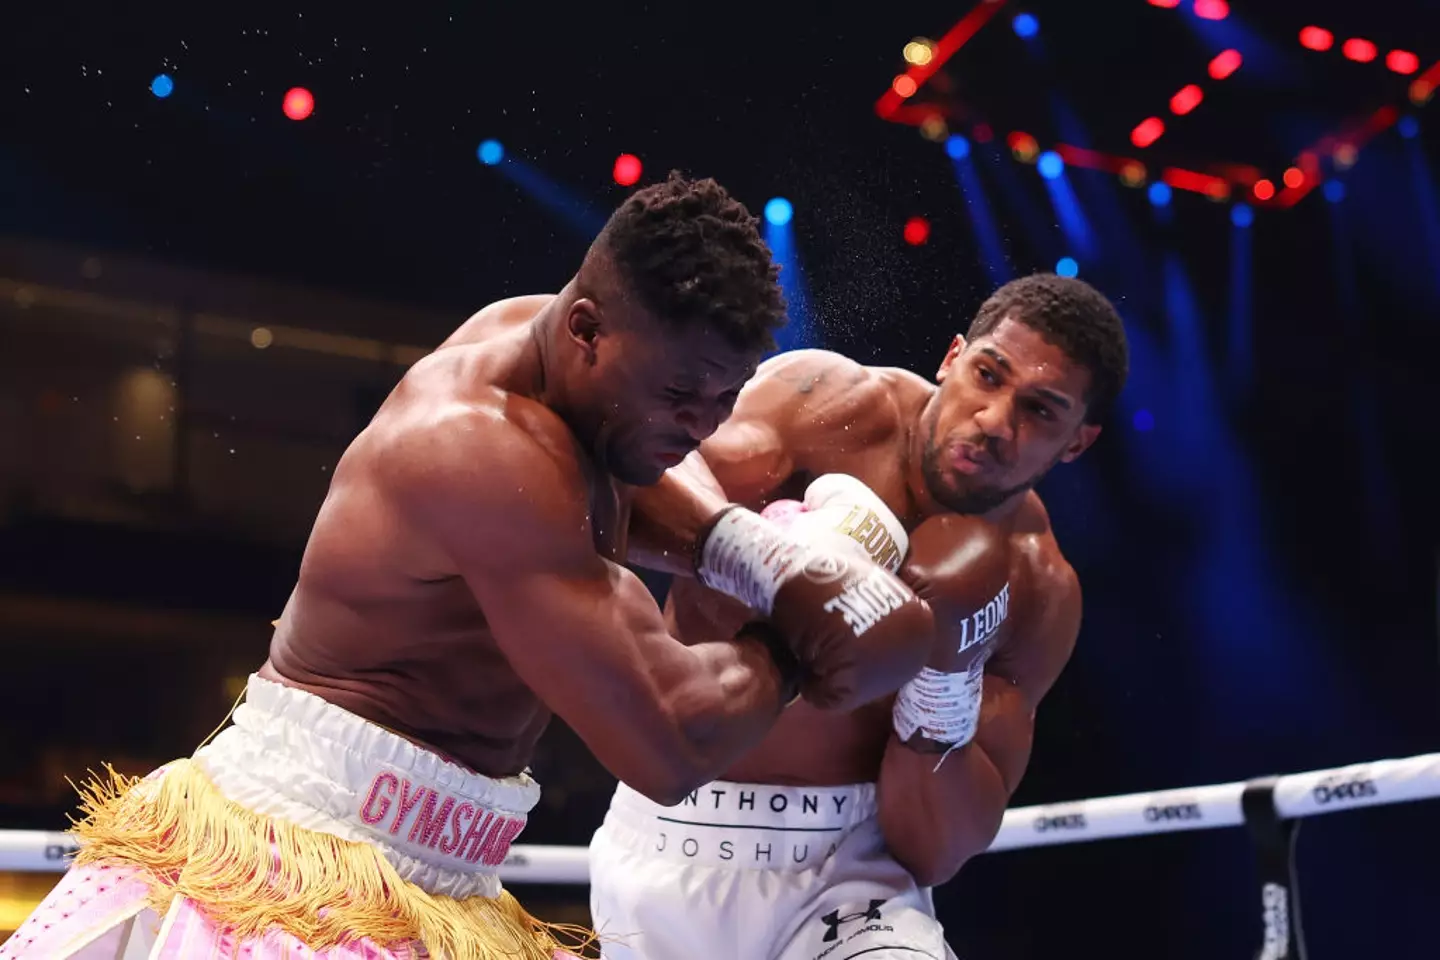 Joshua emerged victorious with a brutal second round KO.